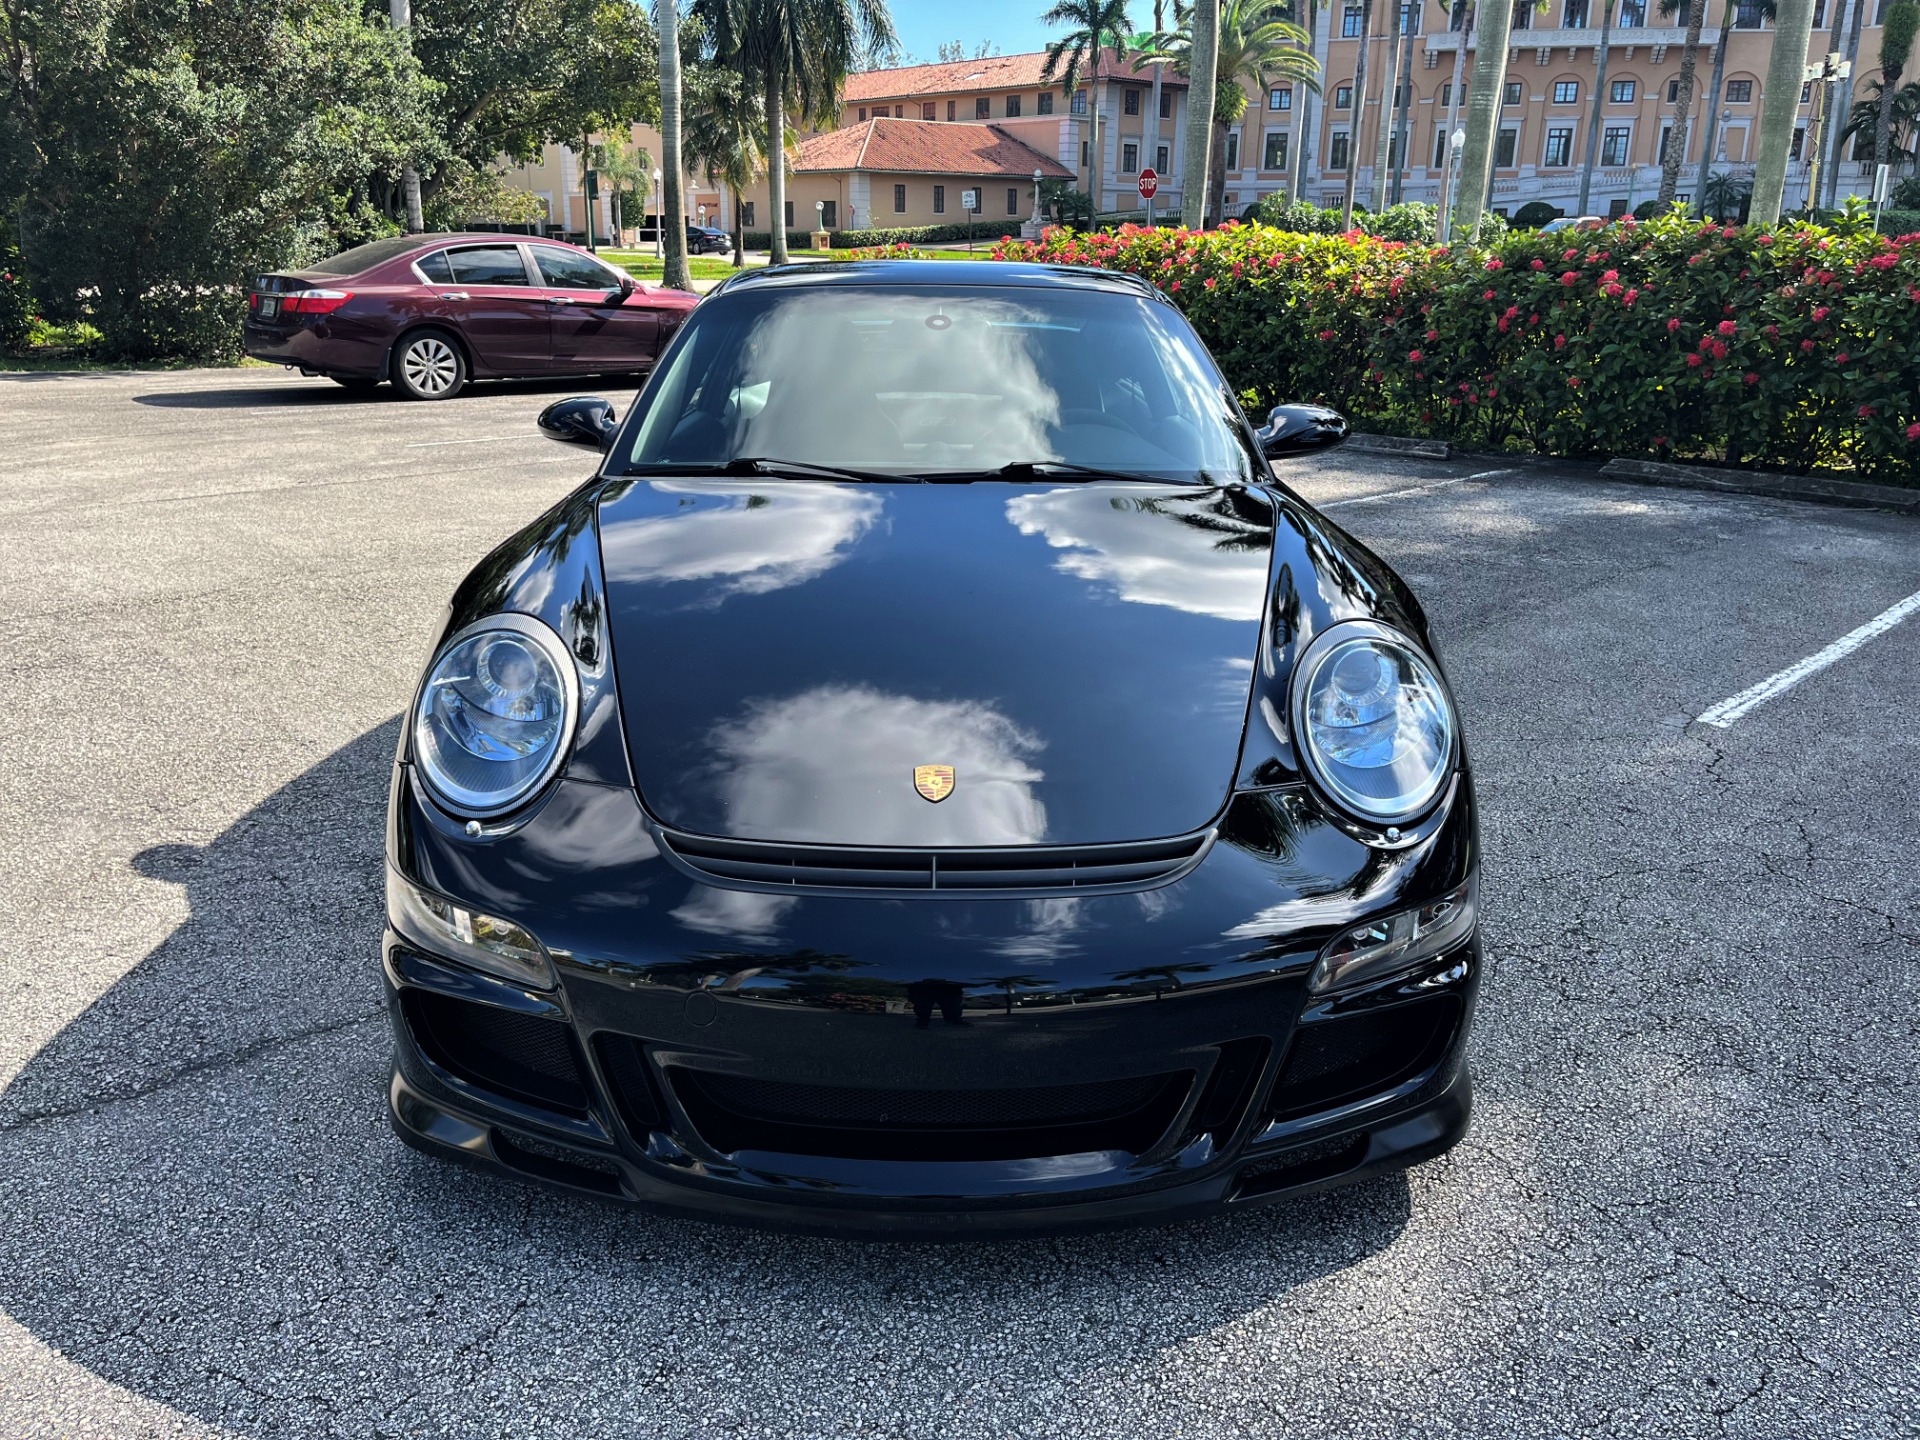 Used 2007 Porsche 911 GT3 for sale $139,850 at The Gables Sports Cars in Miami FL 33146 3